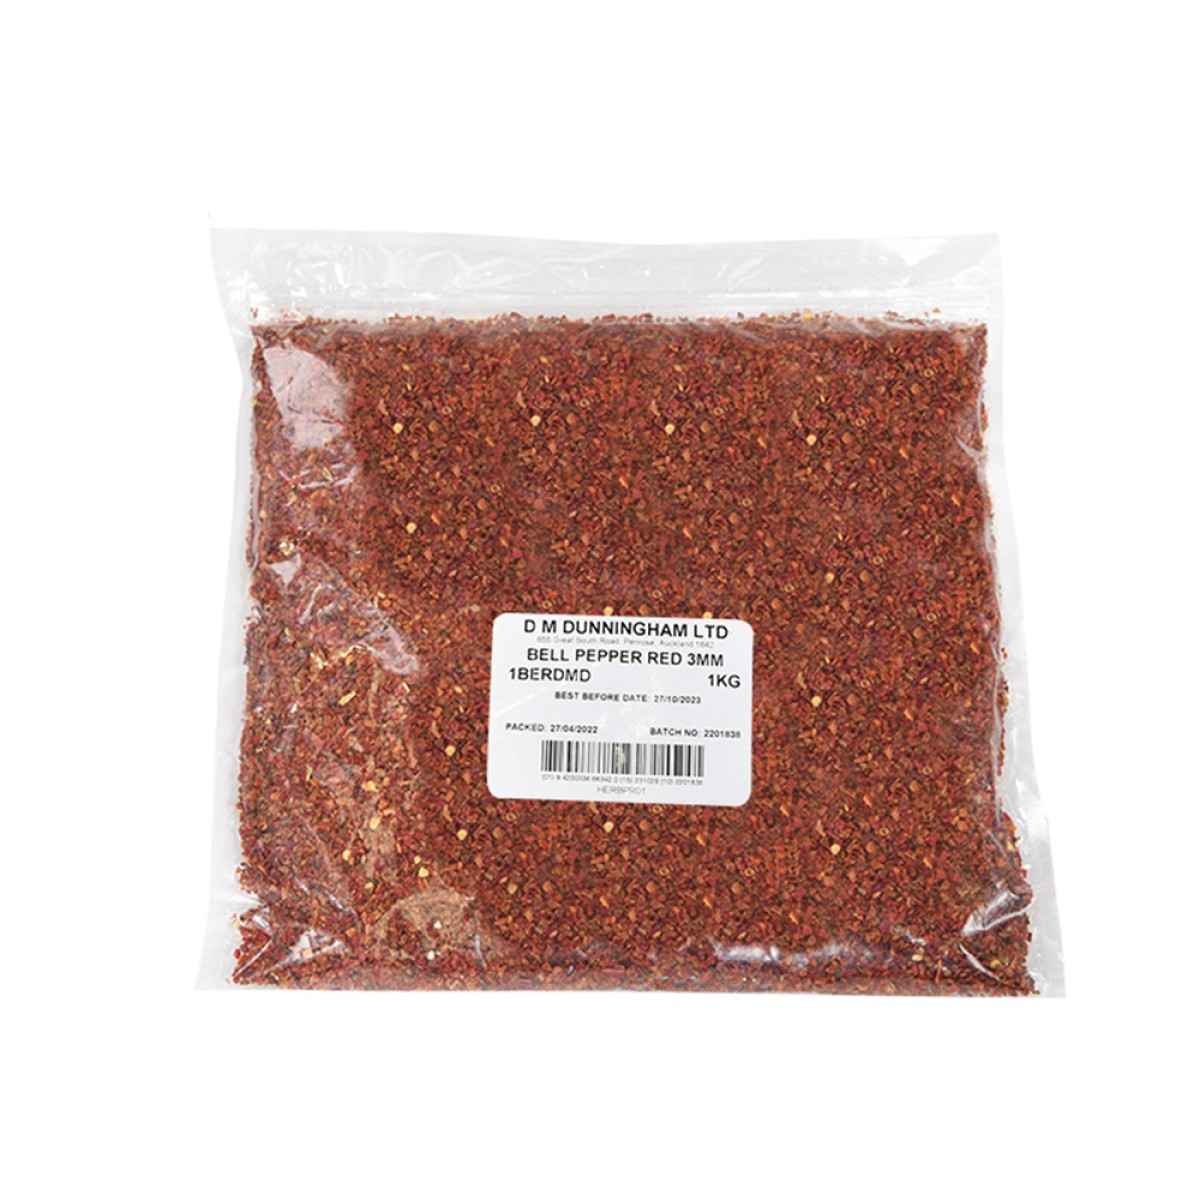 BELL PEPPER RED 3MM FLAKES 1KG